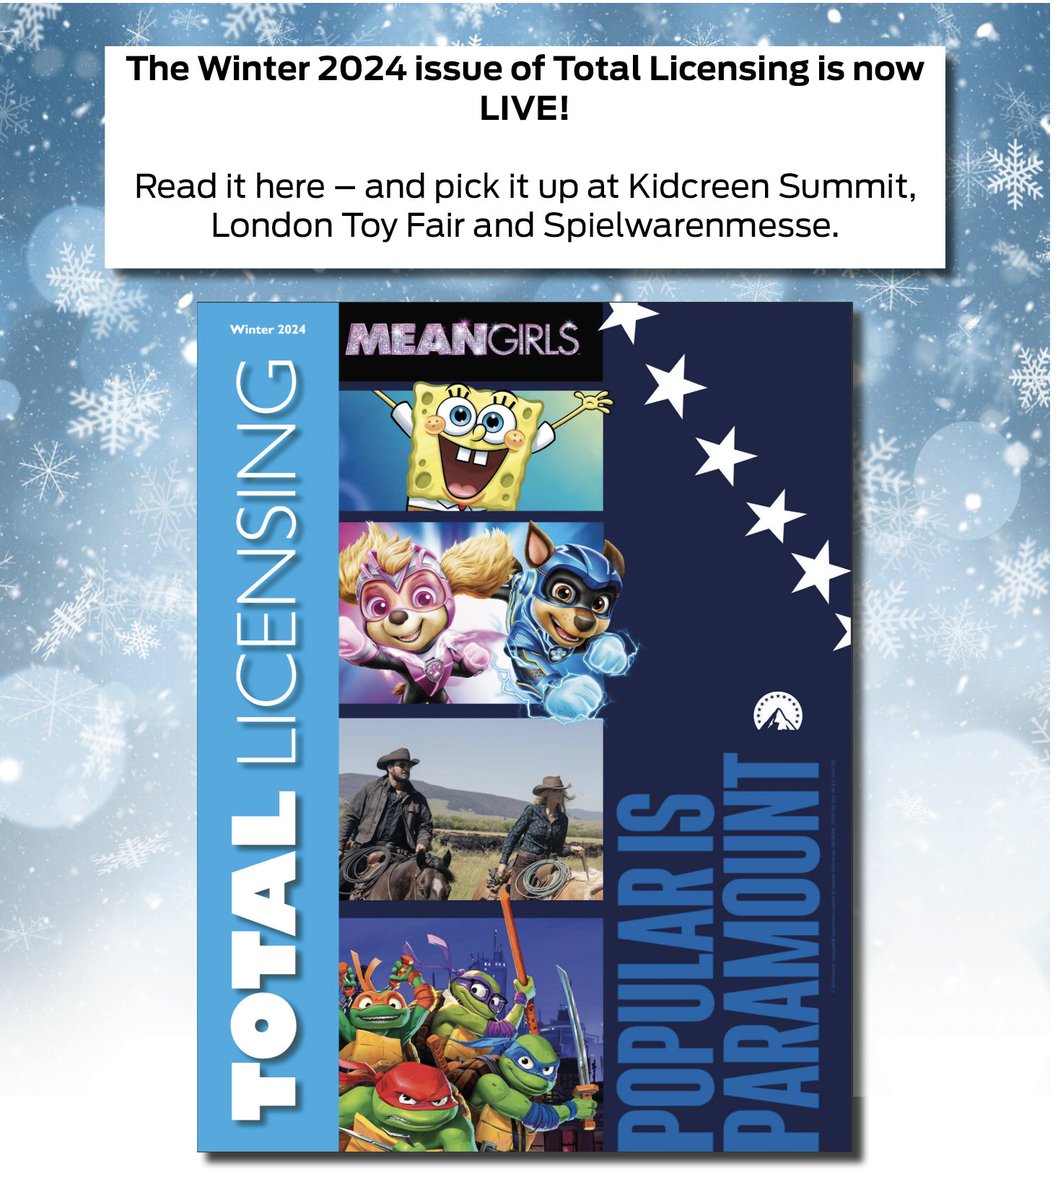 The Winter 2024 issue of Total Licensing is now live! You can read it here, and pick it up at Kidscreen, London Toy Fair, and Nuremberg Toy Fair! issuu.com/totallicensing…